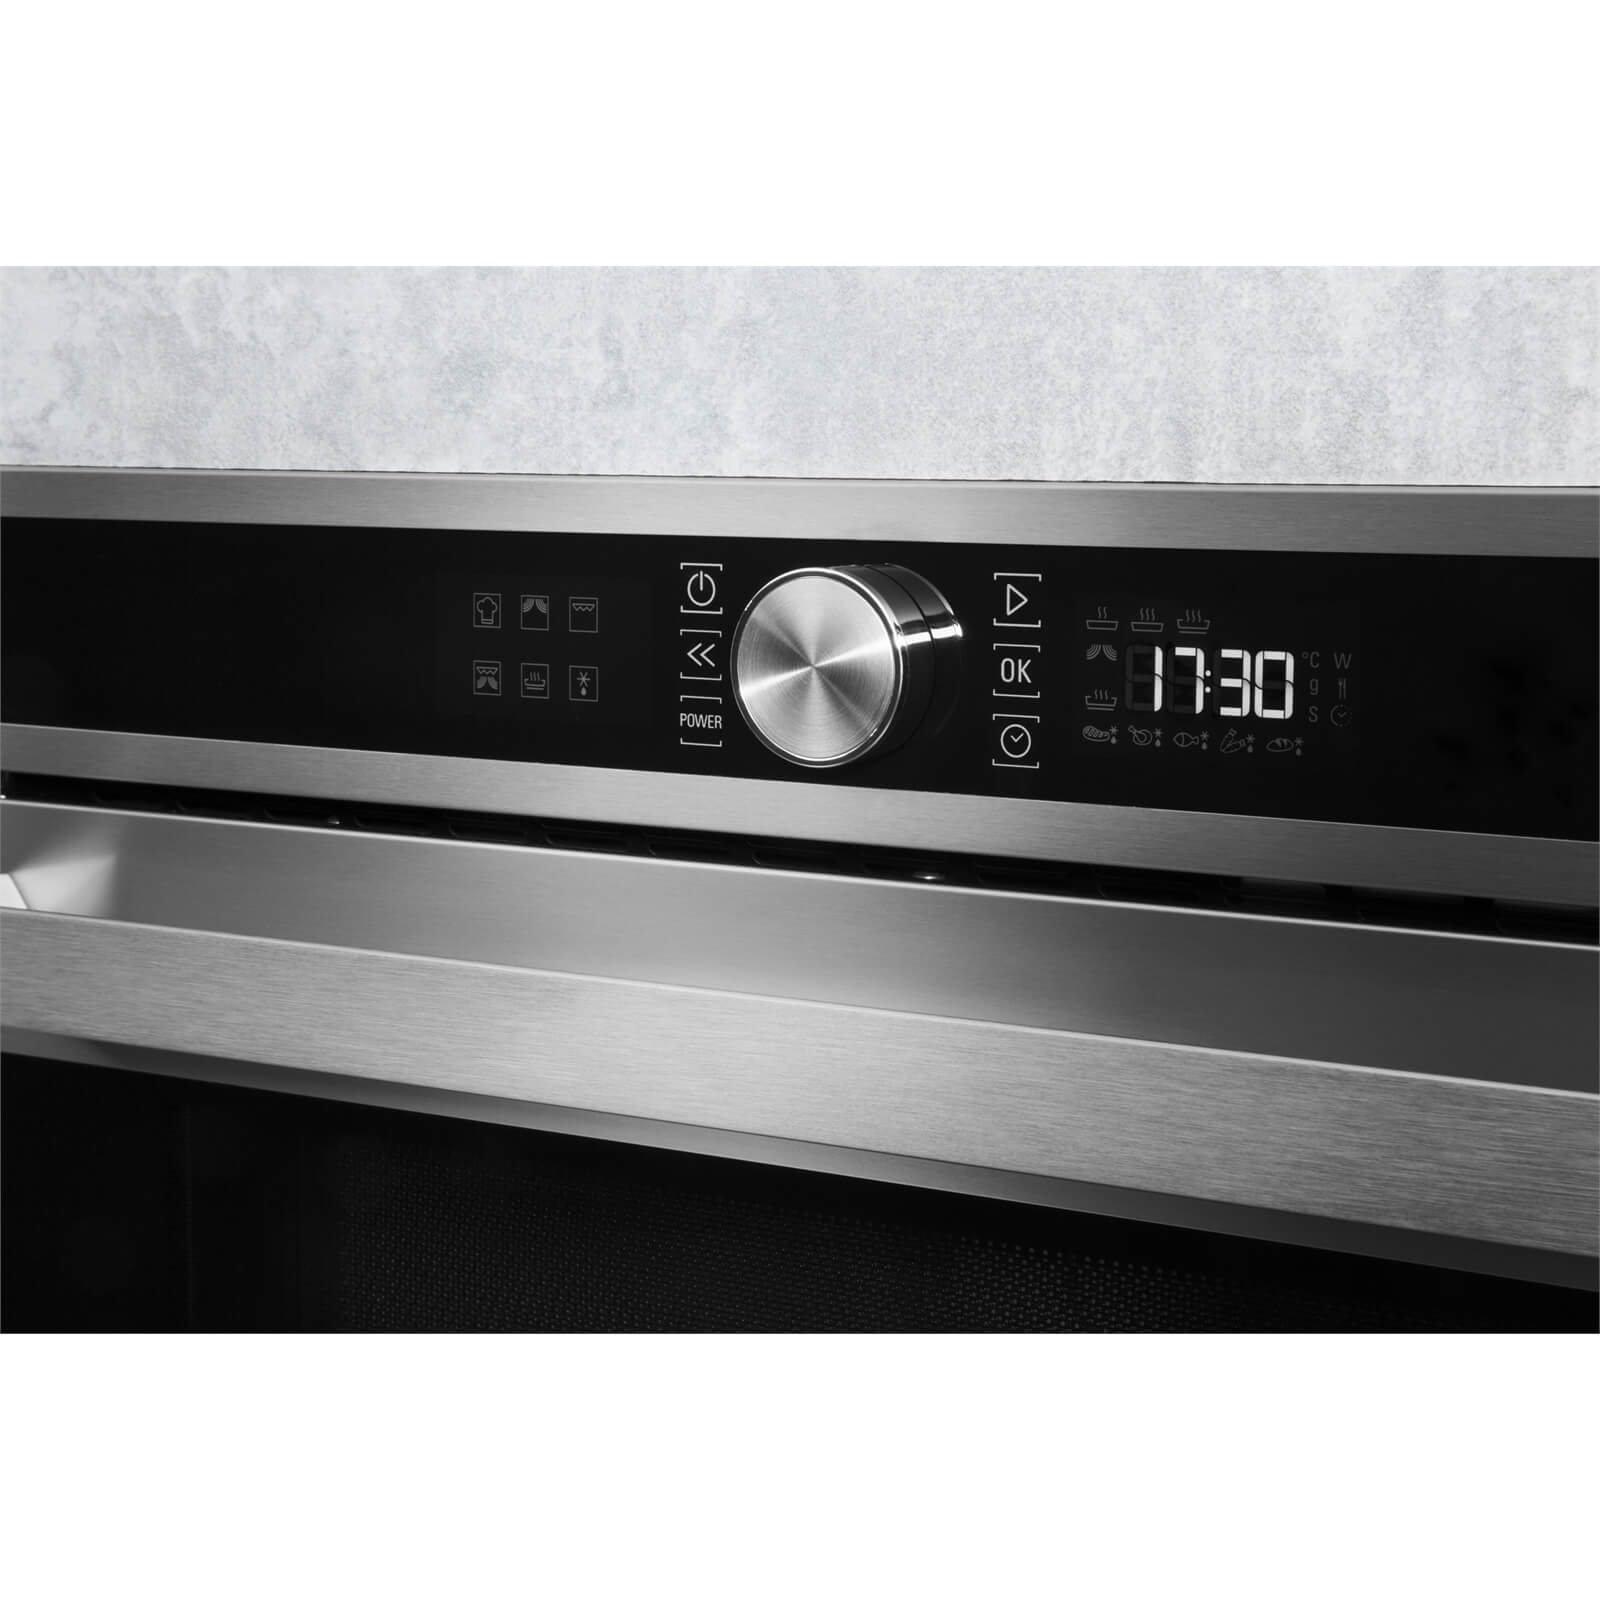 Hotpoint Class 5 MD 554 IX H Built-in Microwave - Stainless Steel